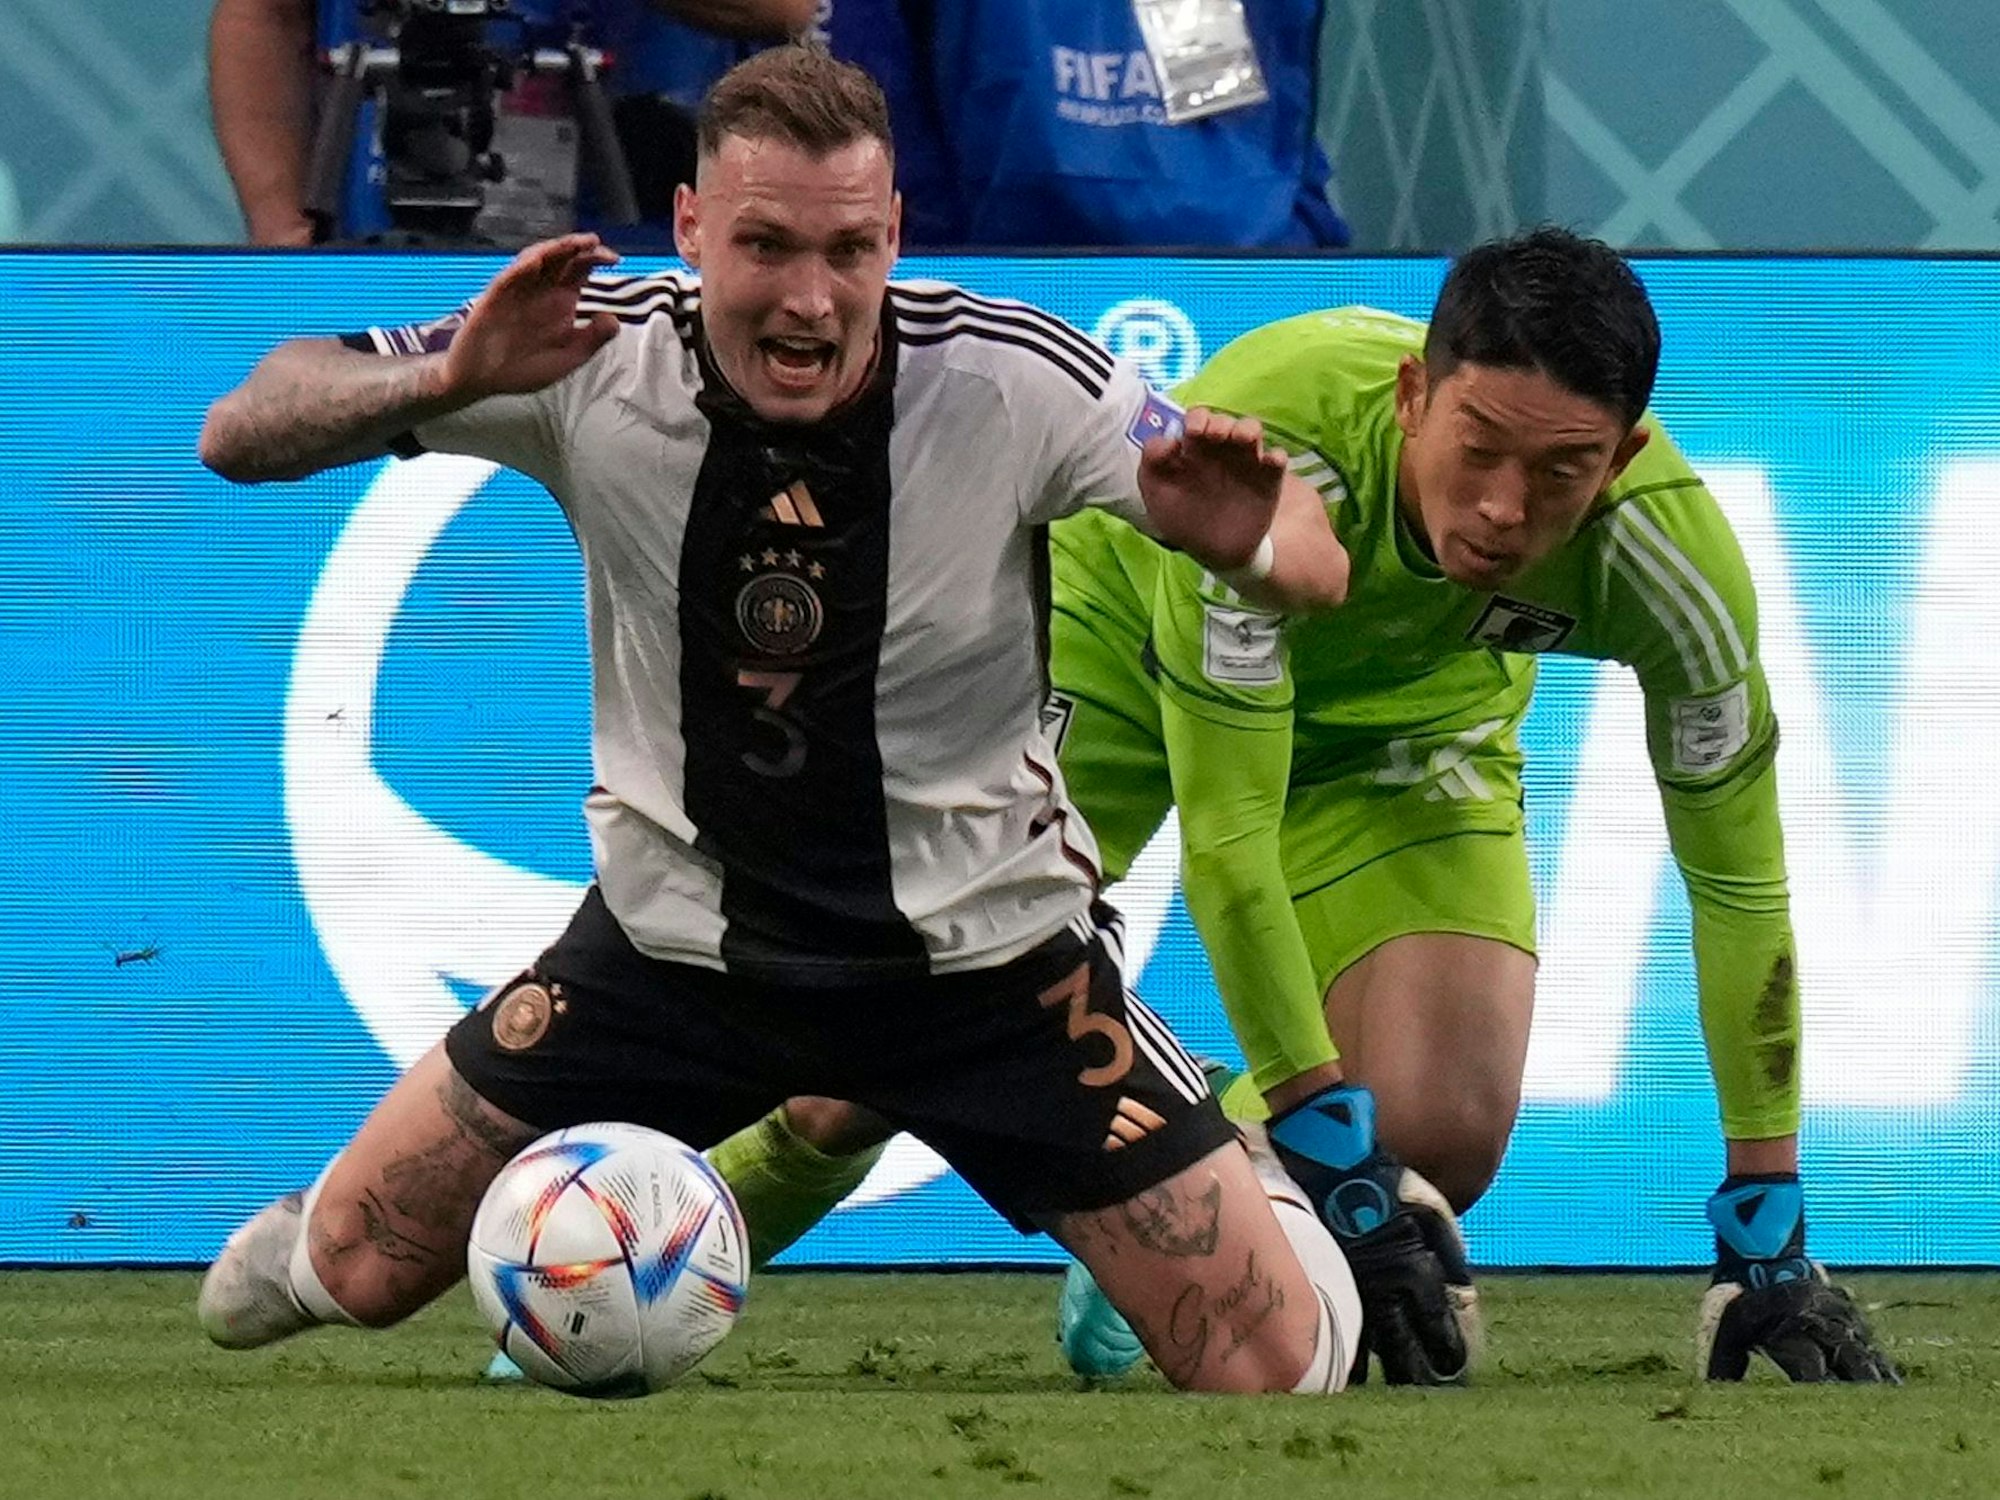 Germany's David Raum, left, fights for the ball with Japan's goalkeeper Shuichi Gonda during the World Cup group E soccer match between Germany and Japan, at the Khalifa International Stadium in Doha, Qatar, Wednesday, Nov. 23, 2022. (AP Photo/Eugene Hoshiko)